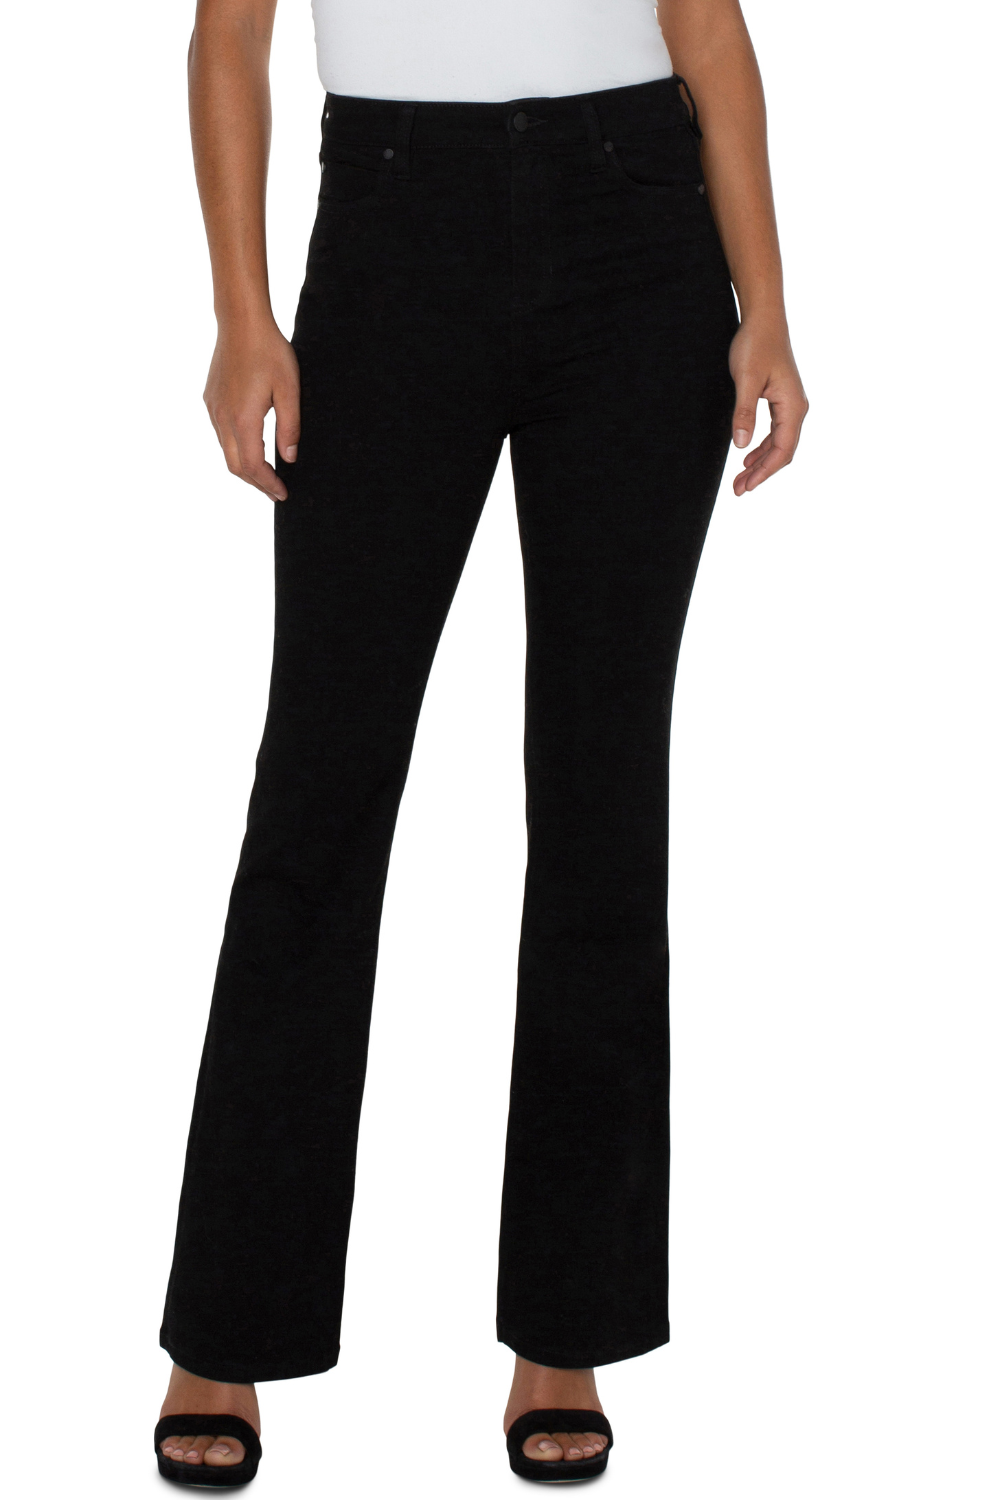 Lucy HR Boot Cut 32" Ins